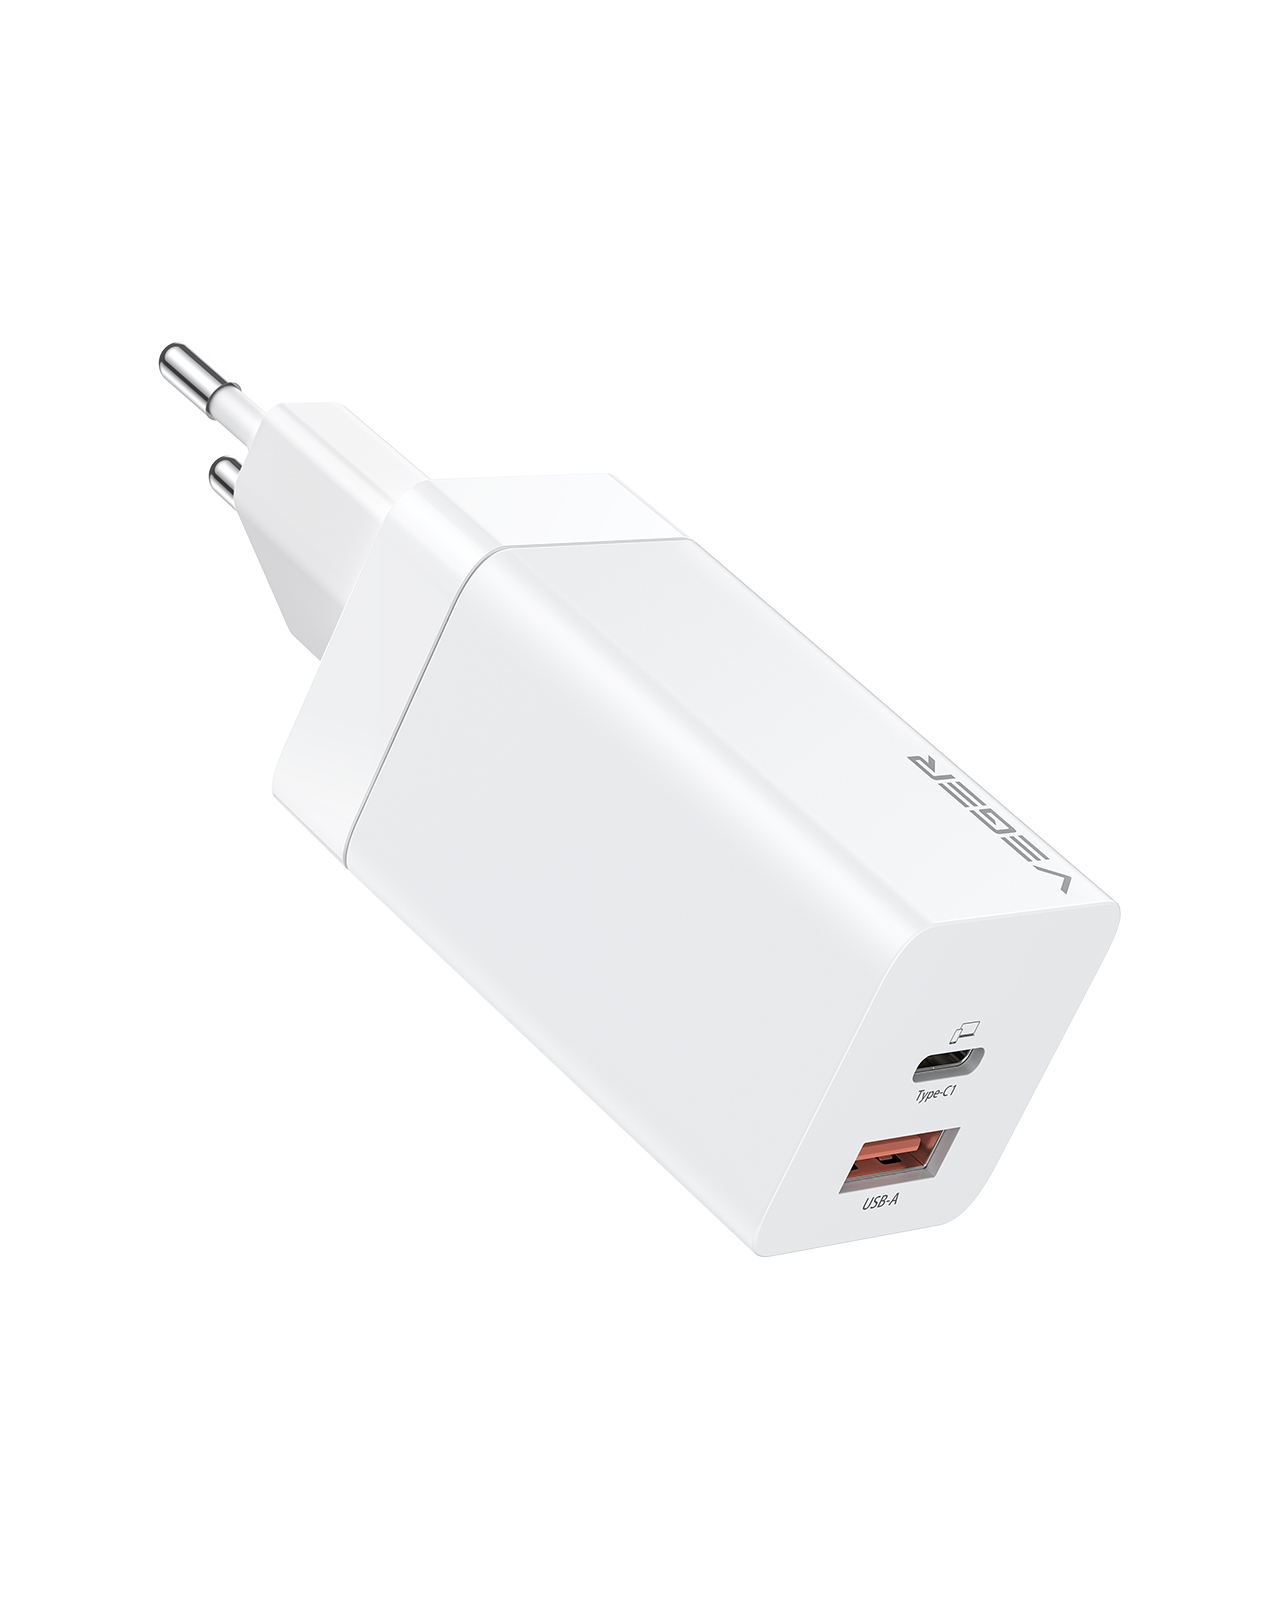 Incarcator laptop Veger CPD65E, 65W, Fast Charge, USB Type-C, Alb